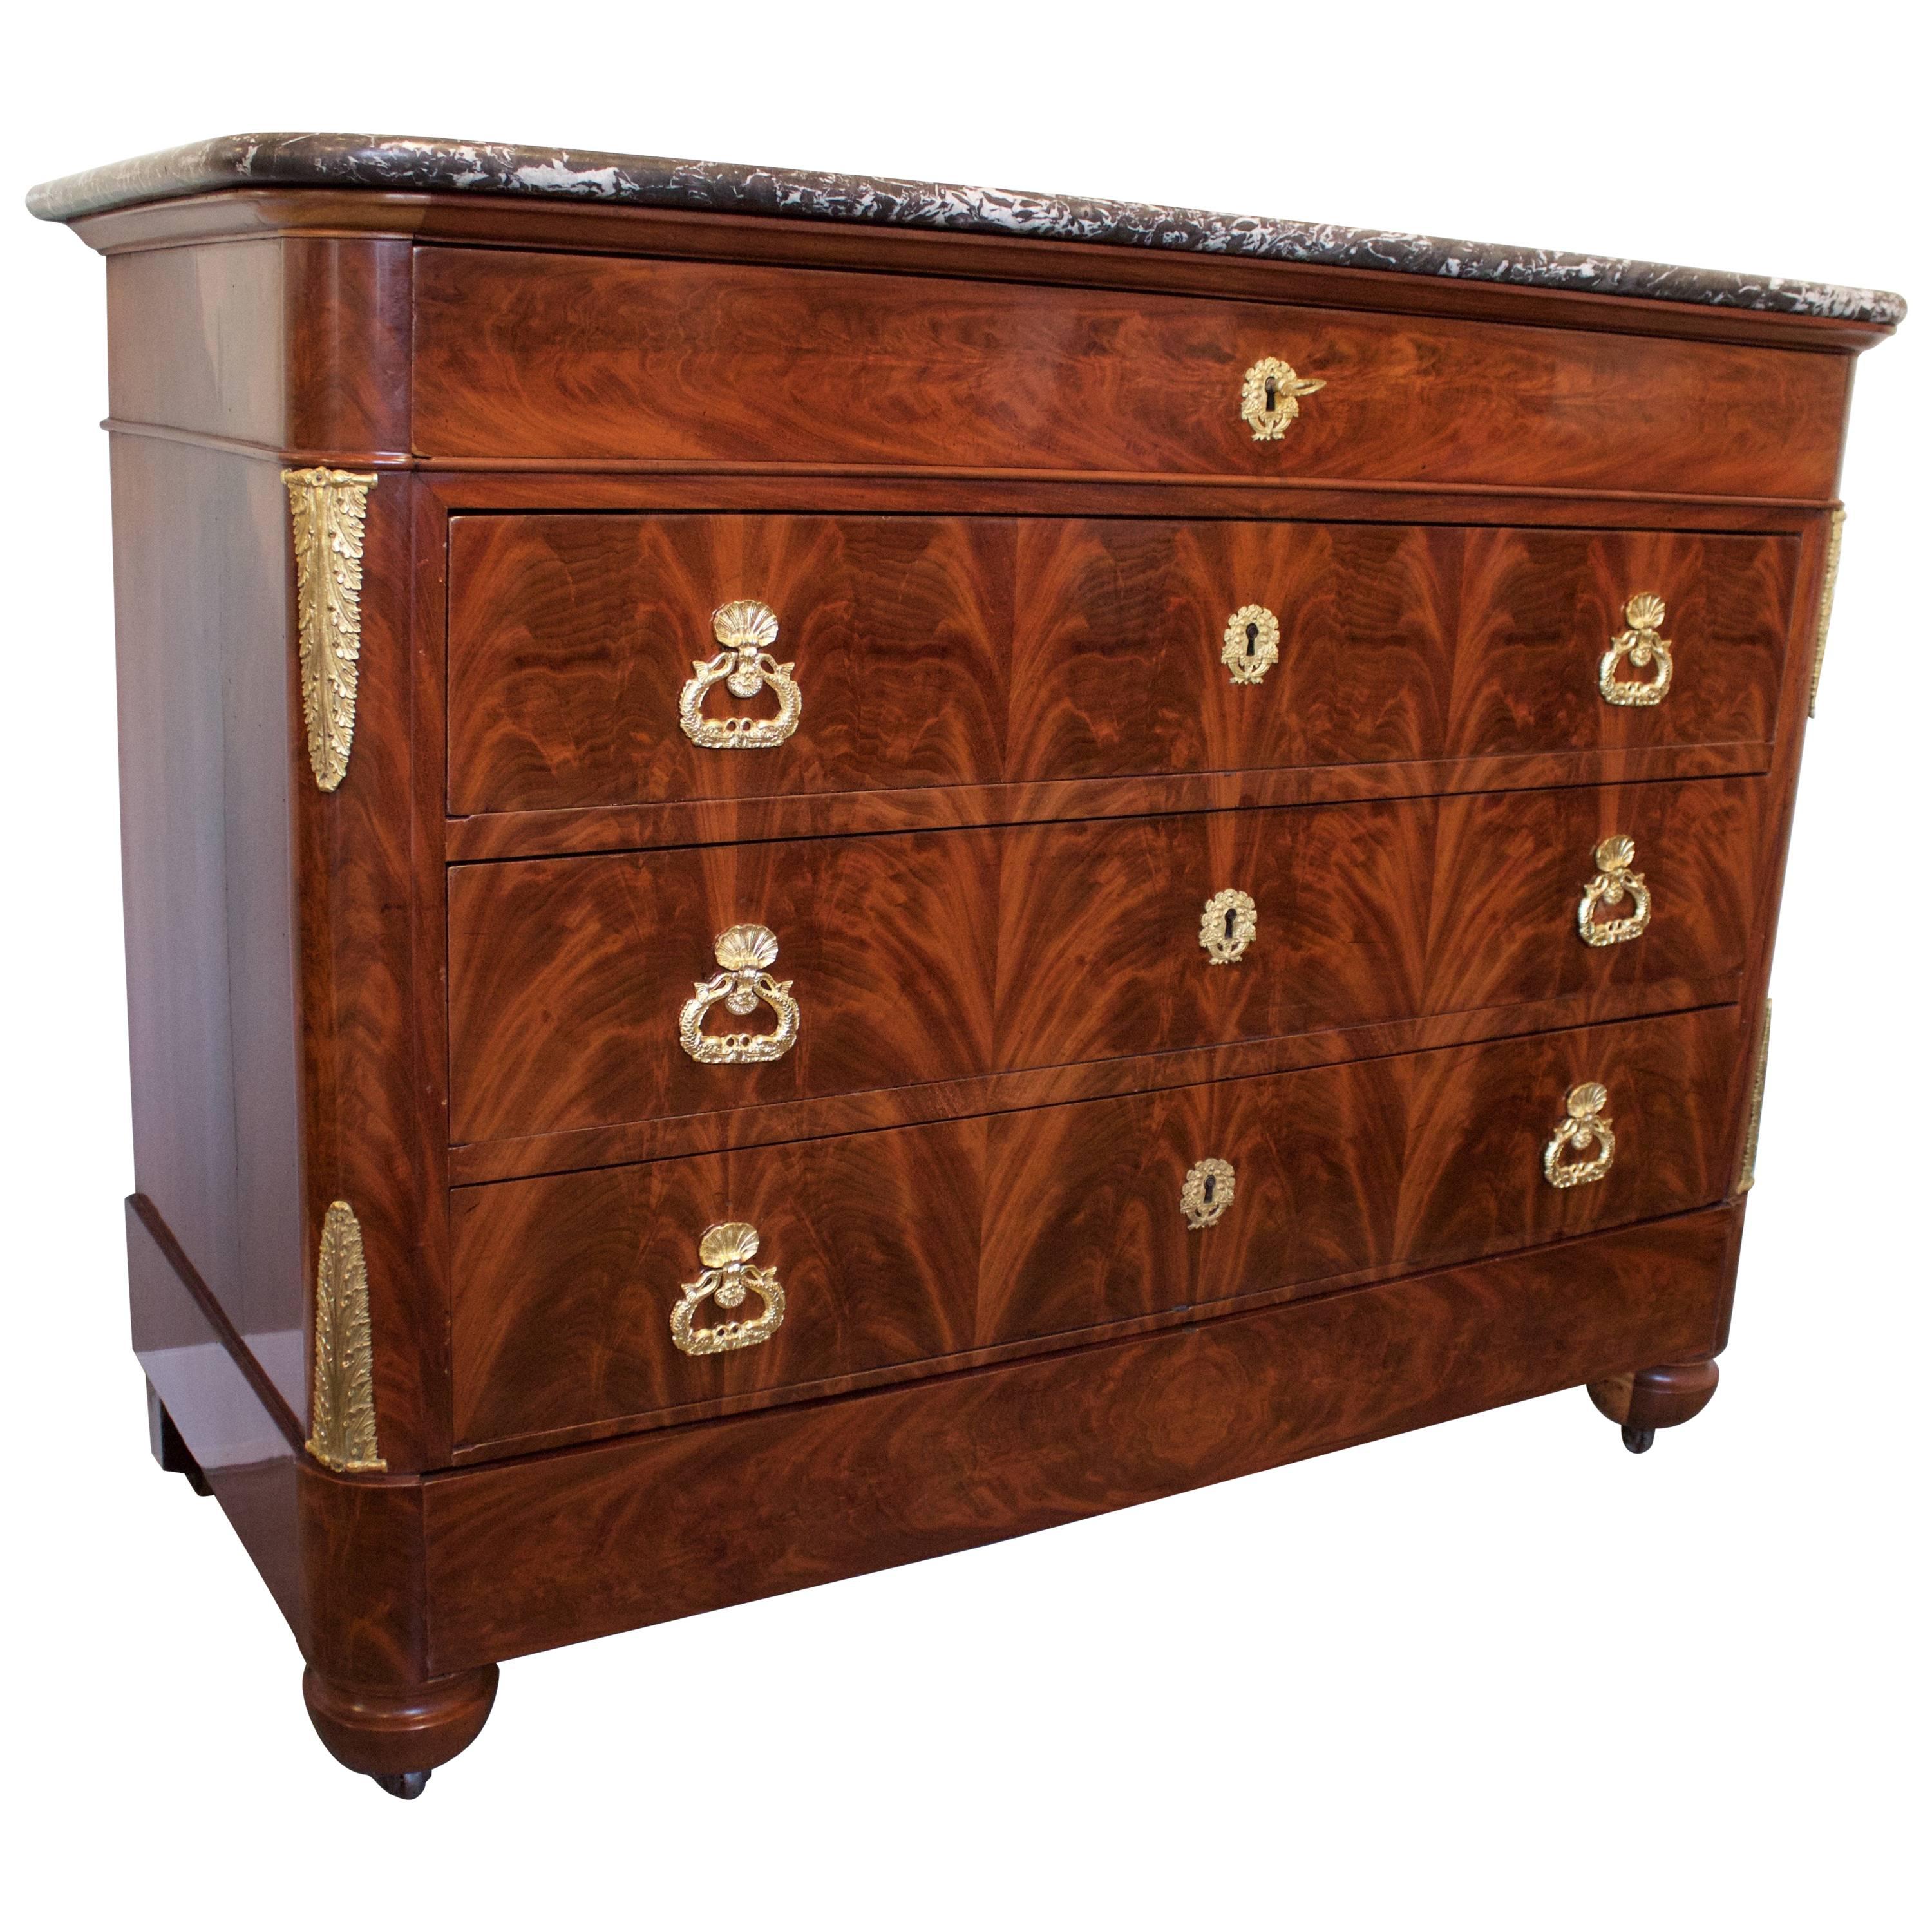 French Louis XVII Period Chest in Flame Mahogany and Marble-Top For Sale